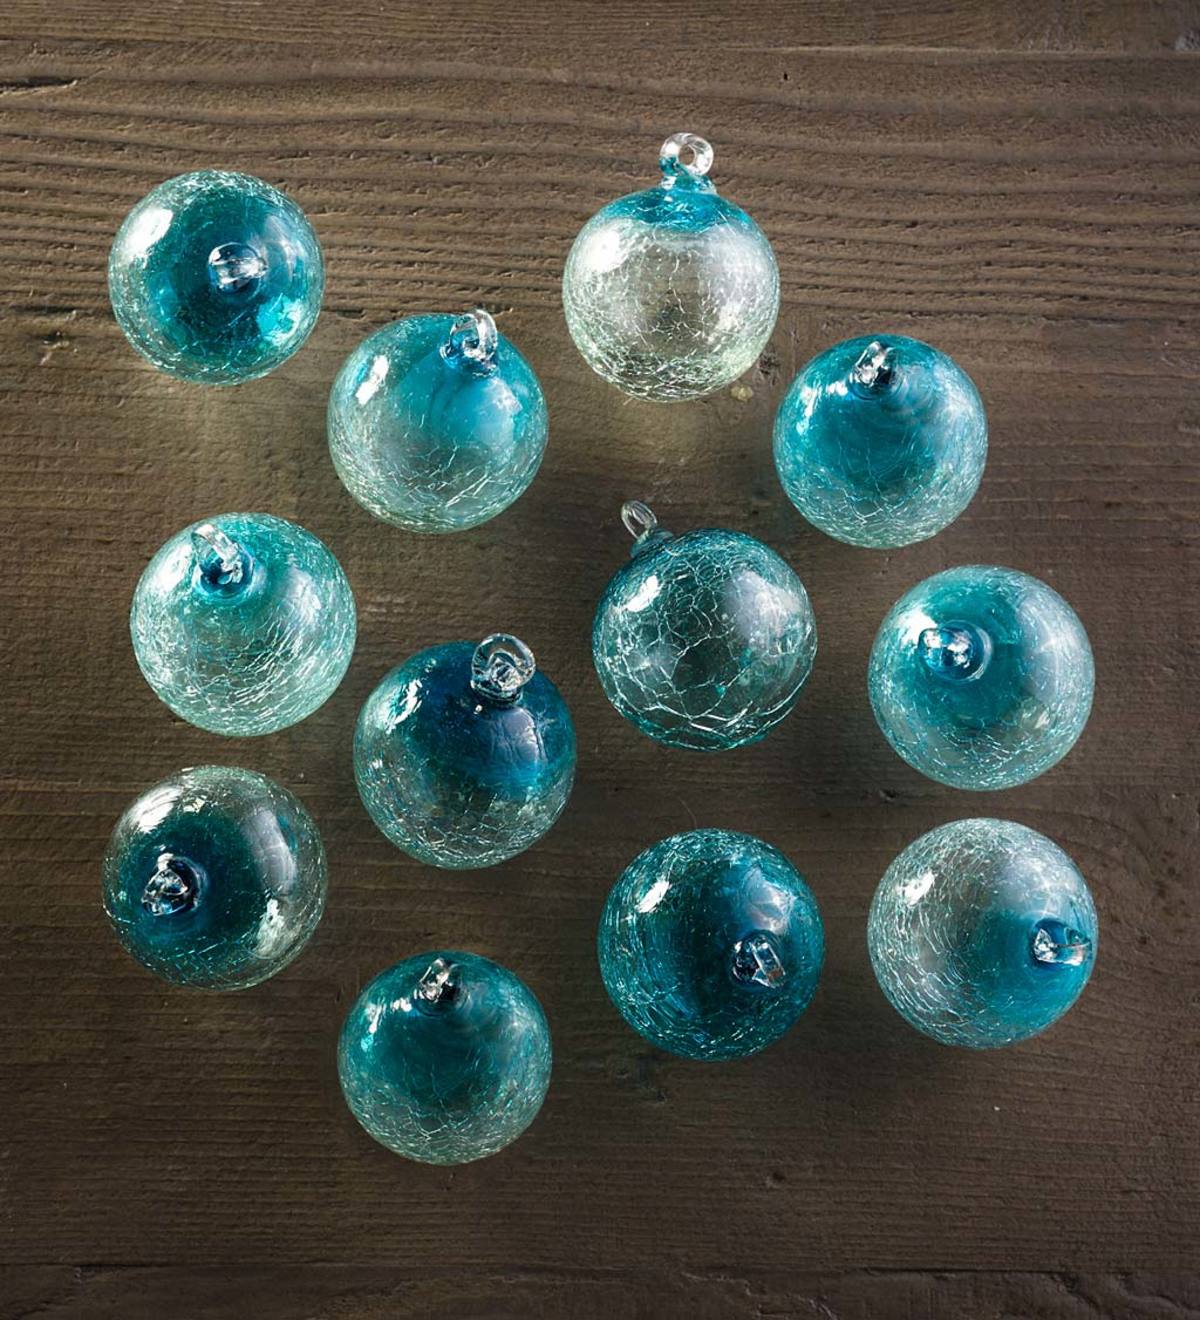 Maya Recycled Glass Extra Small Sphere Ornaments S/12 - Aqua